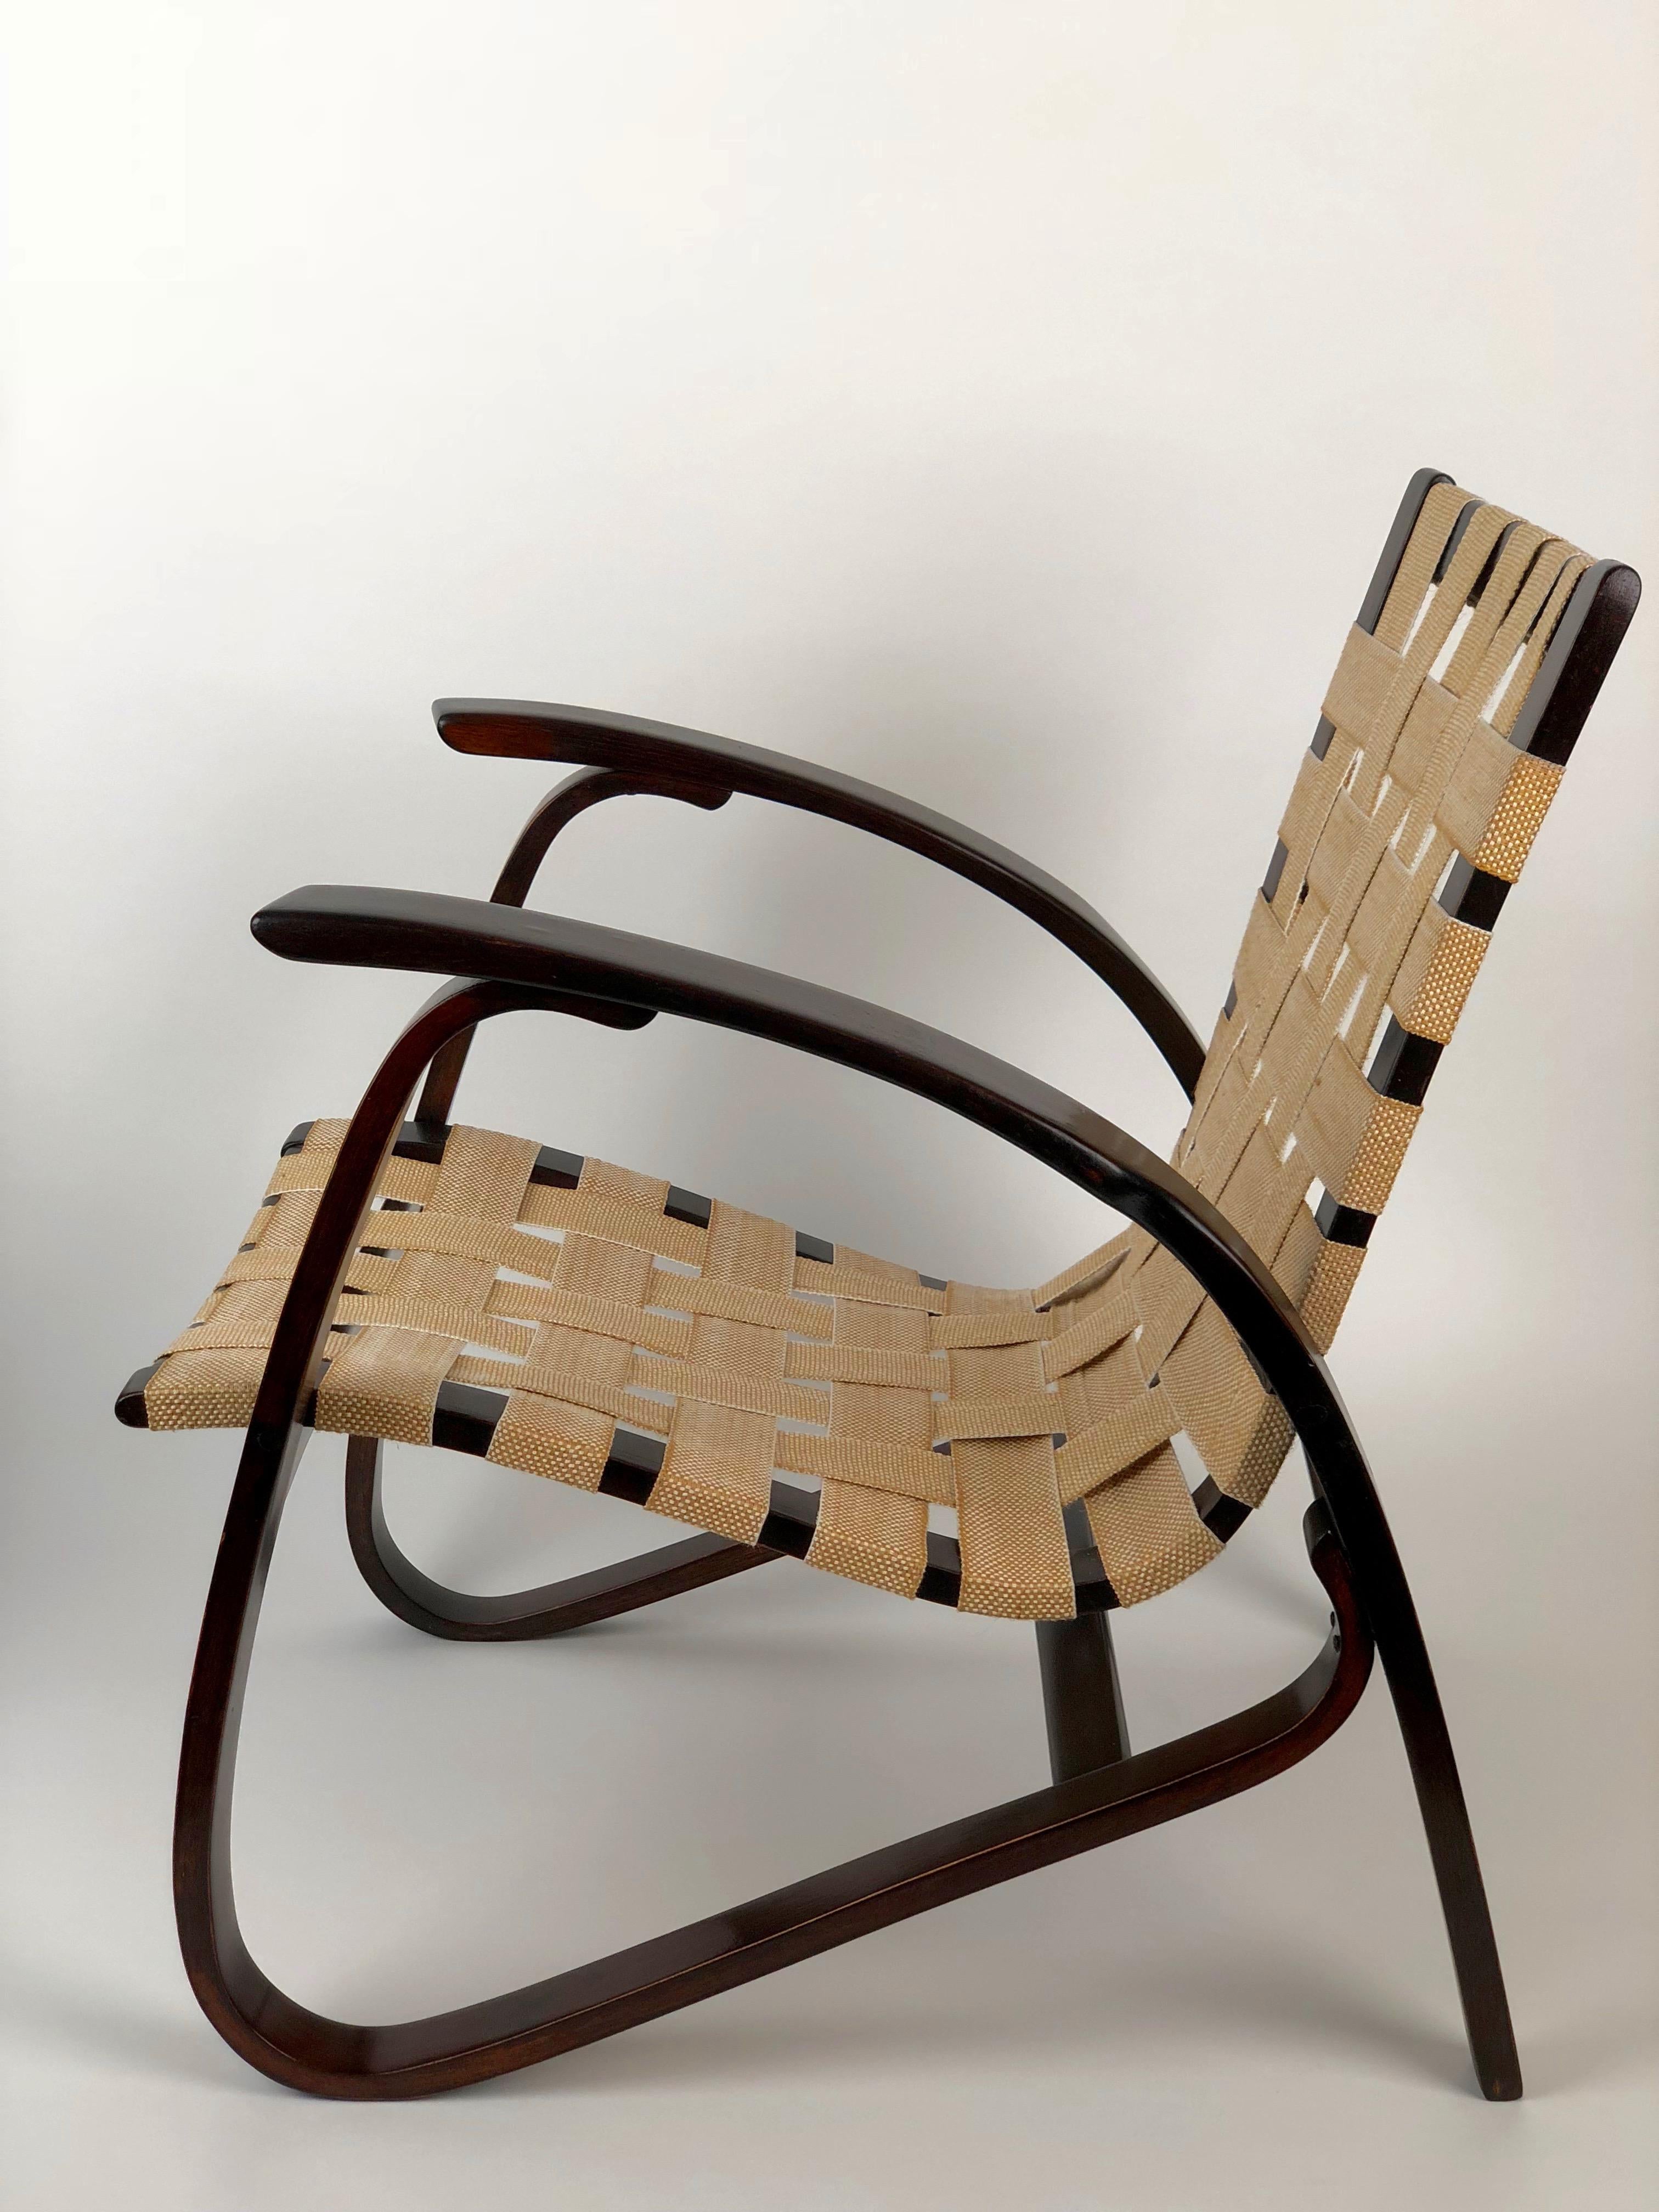 Bentwood Armchair by Jan Vanek for UP Zavody, Brno, Czech Republic, 1930s In Good Condition For Sale In Vienna, Austria